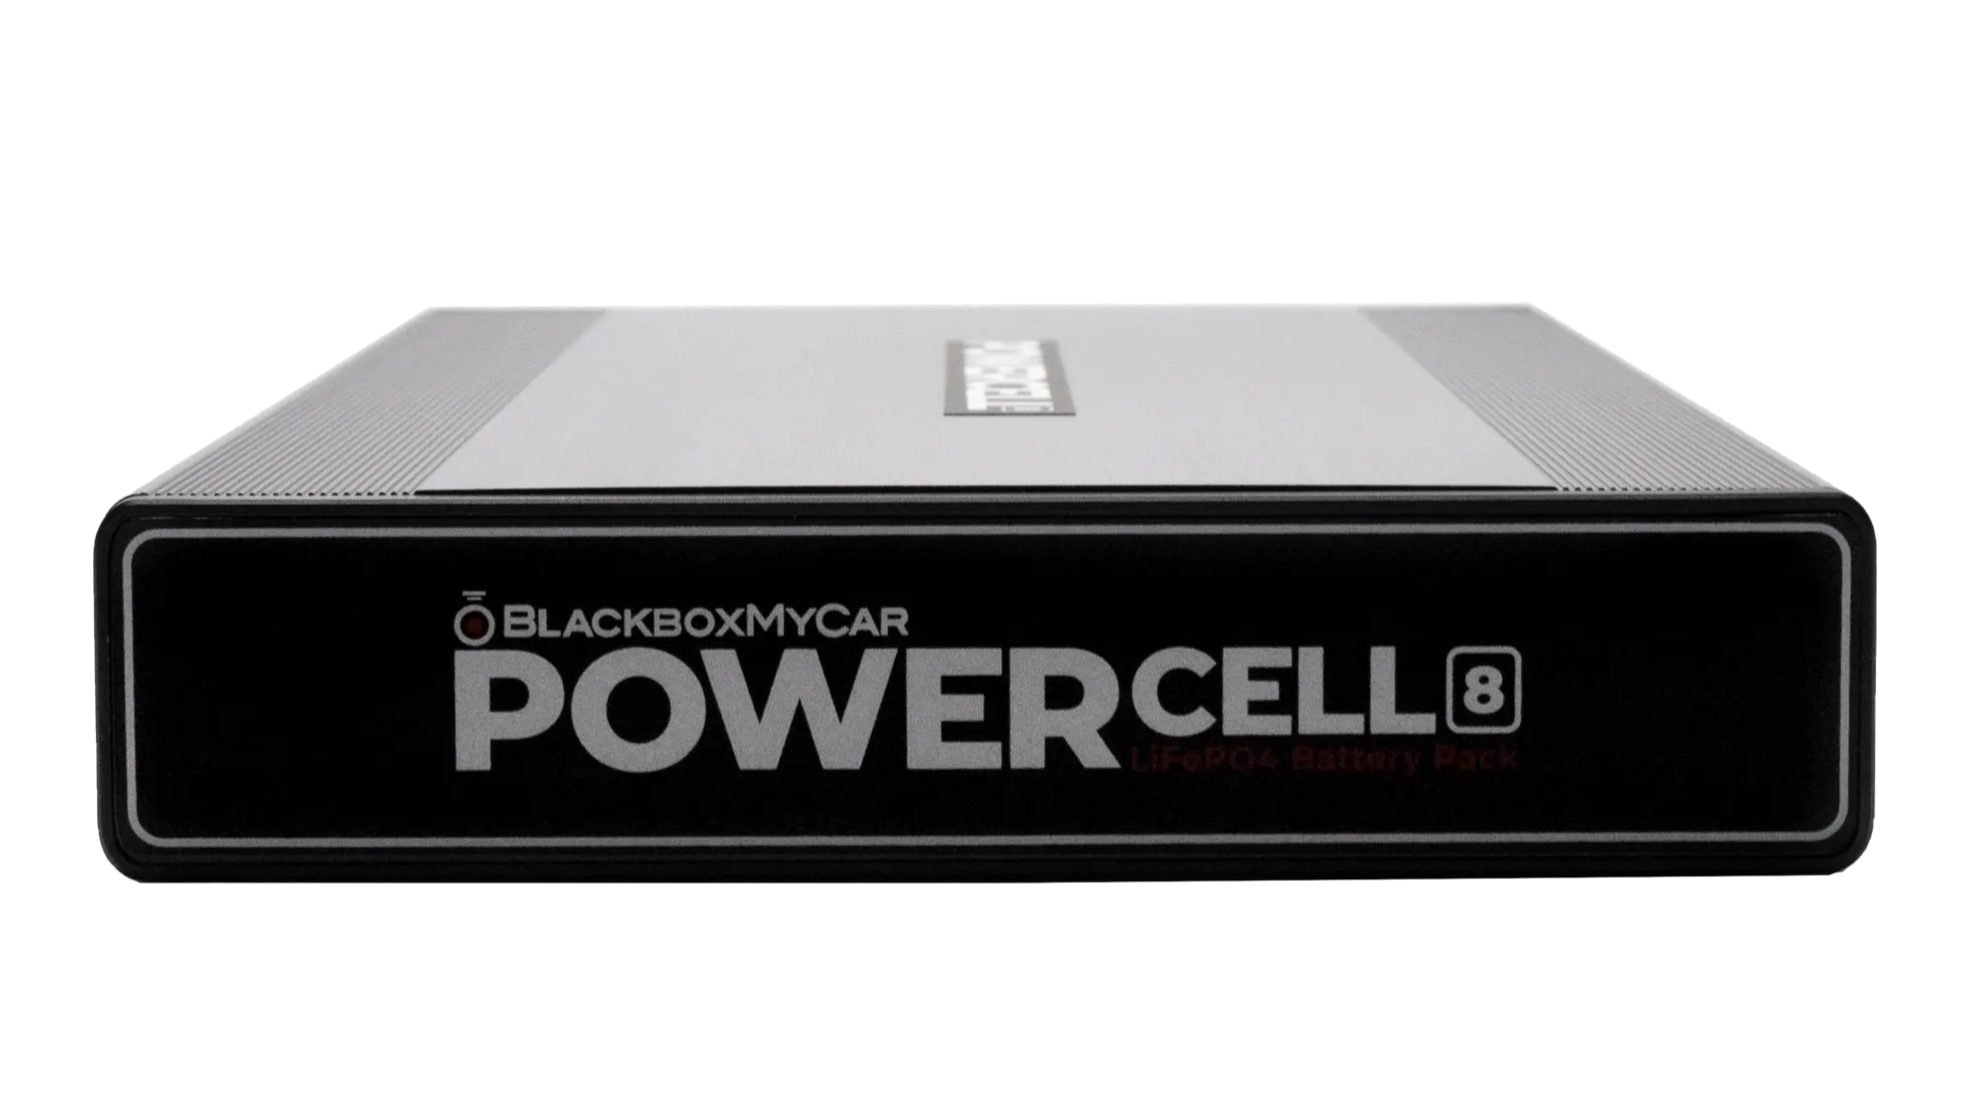 BlackboxMyCar PowerCell 8 Dashcam Battery Pack Review / Testing